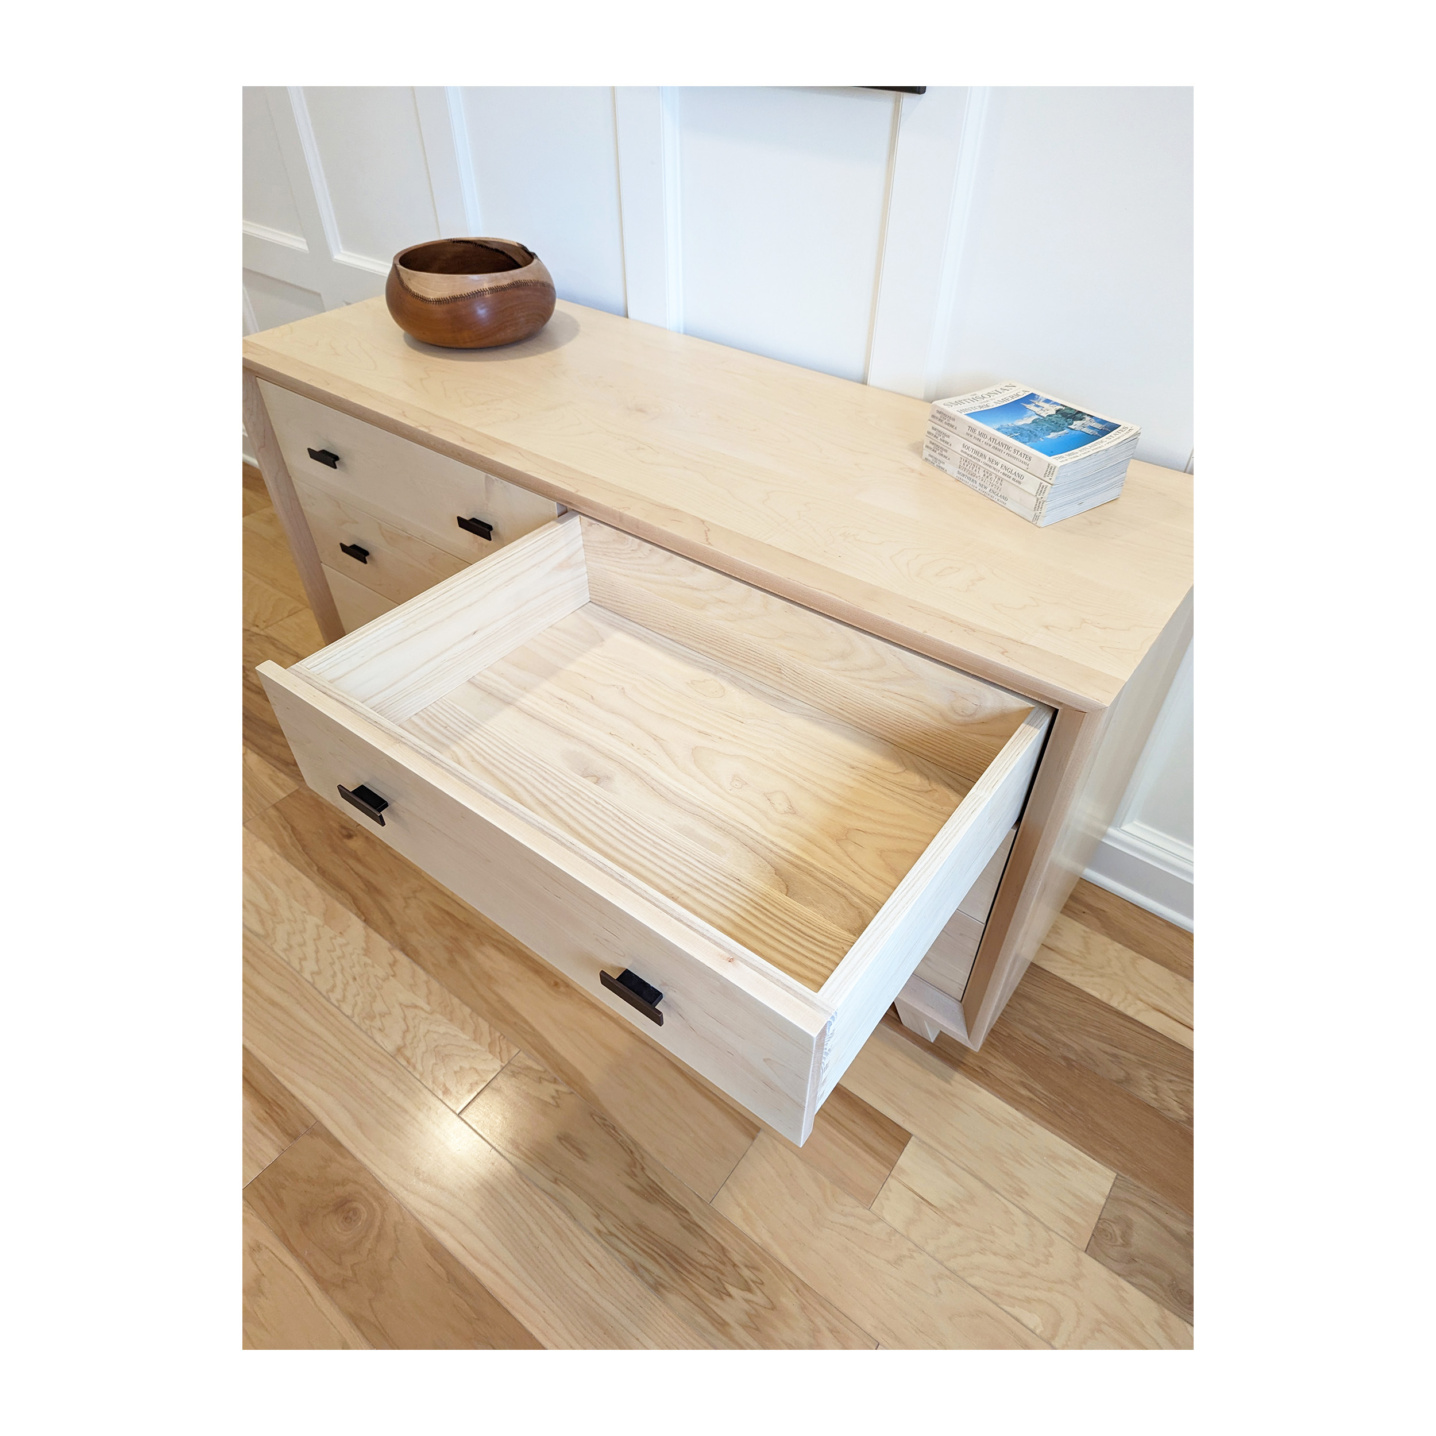 Solid wood dovetail drawers with soft-closing glides